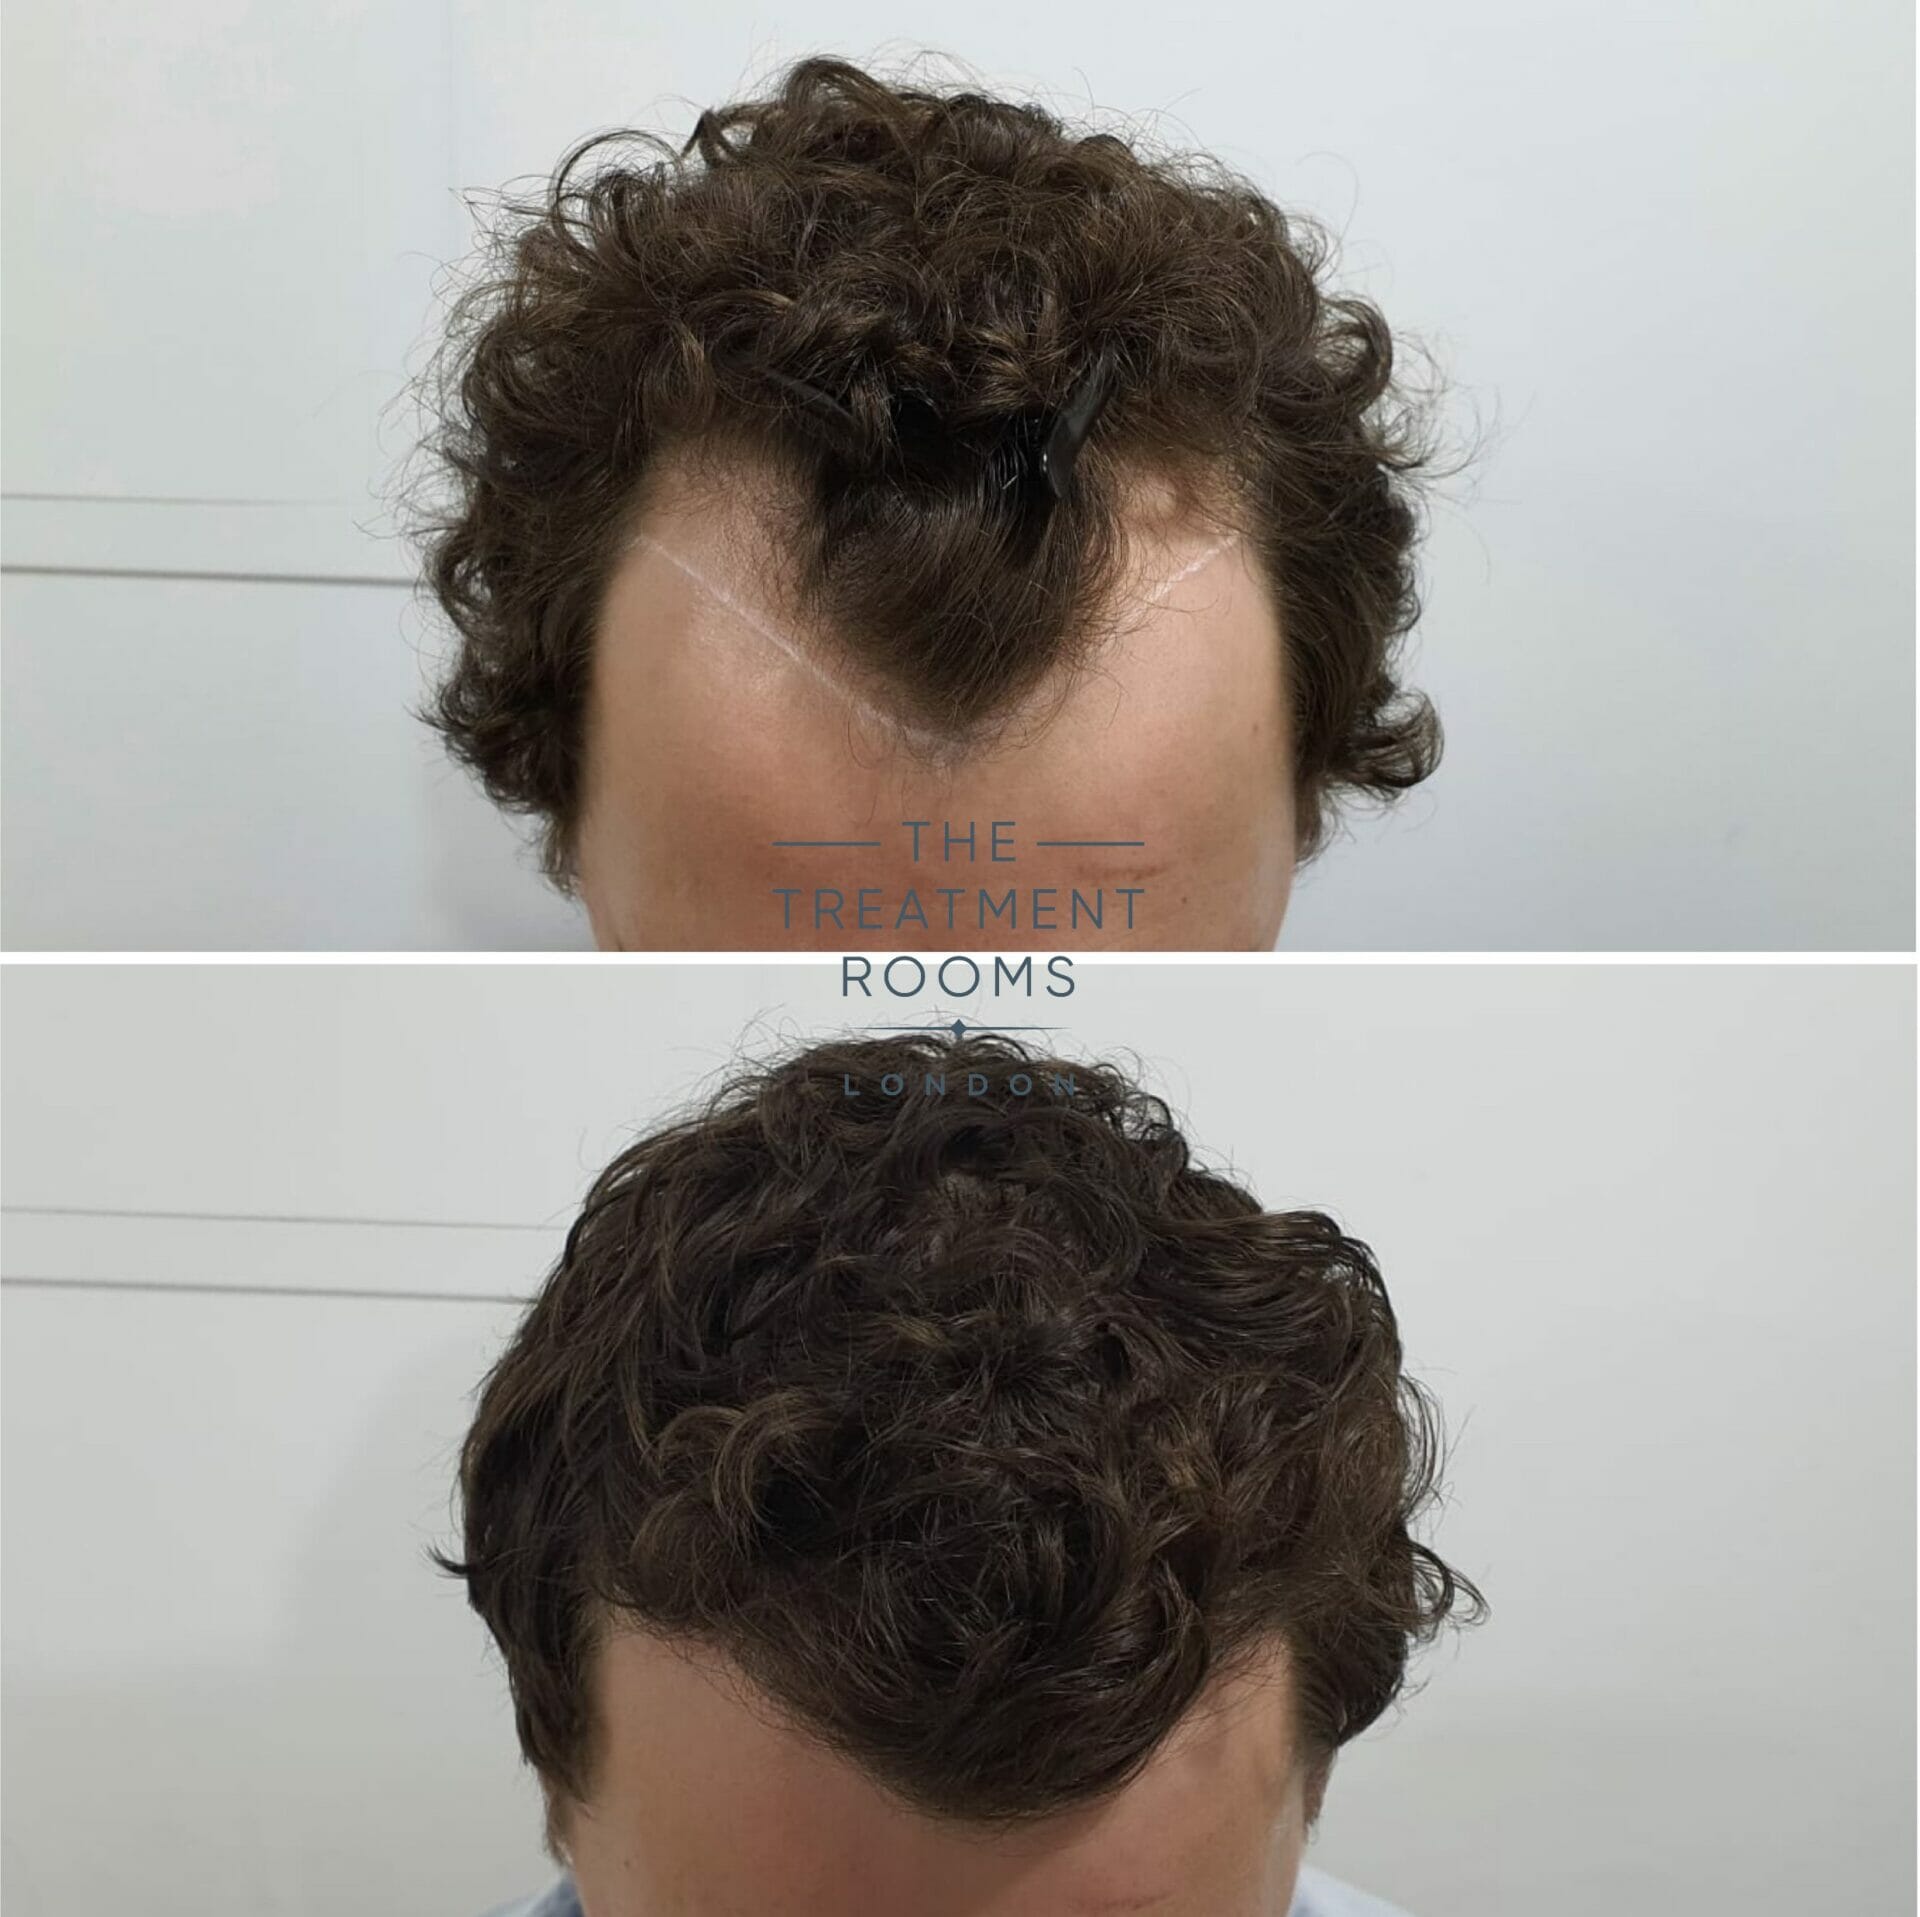 Curly hairline FUE hair transplant 1243 grafts